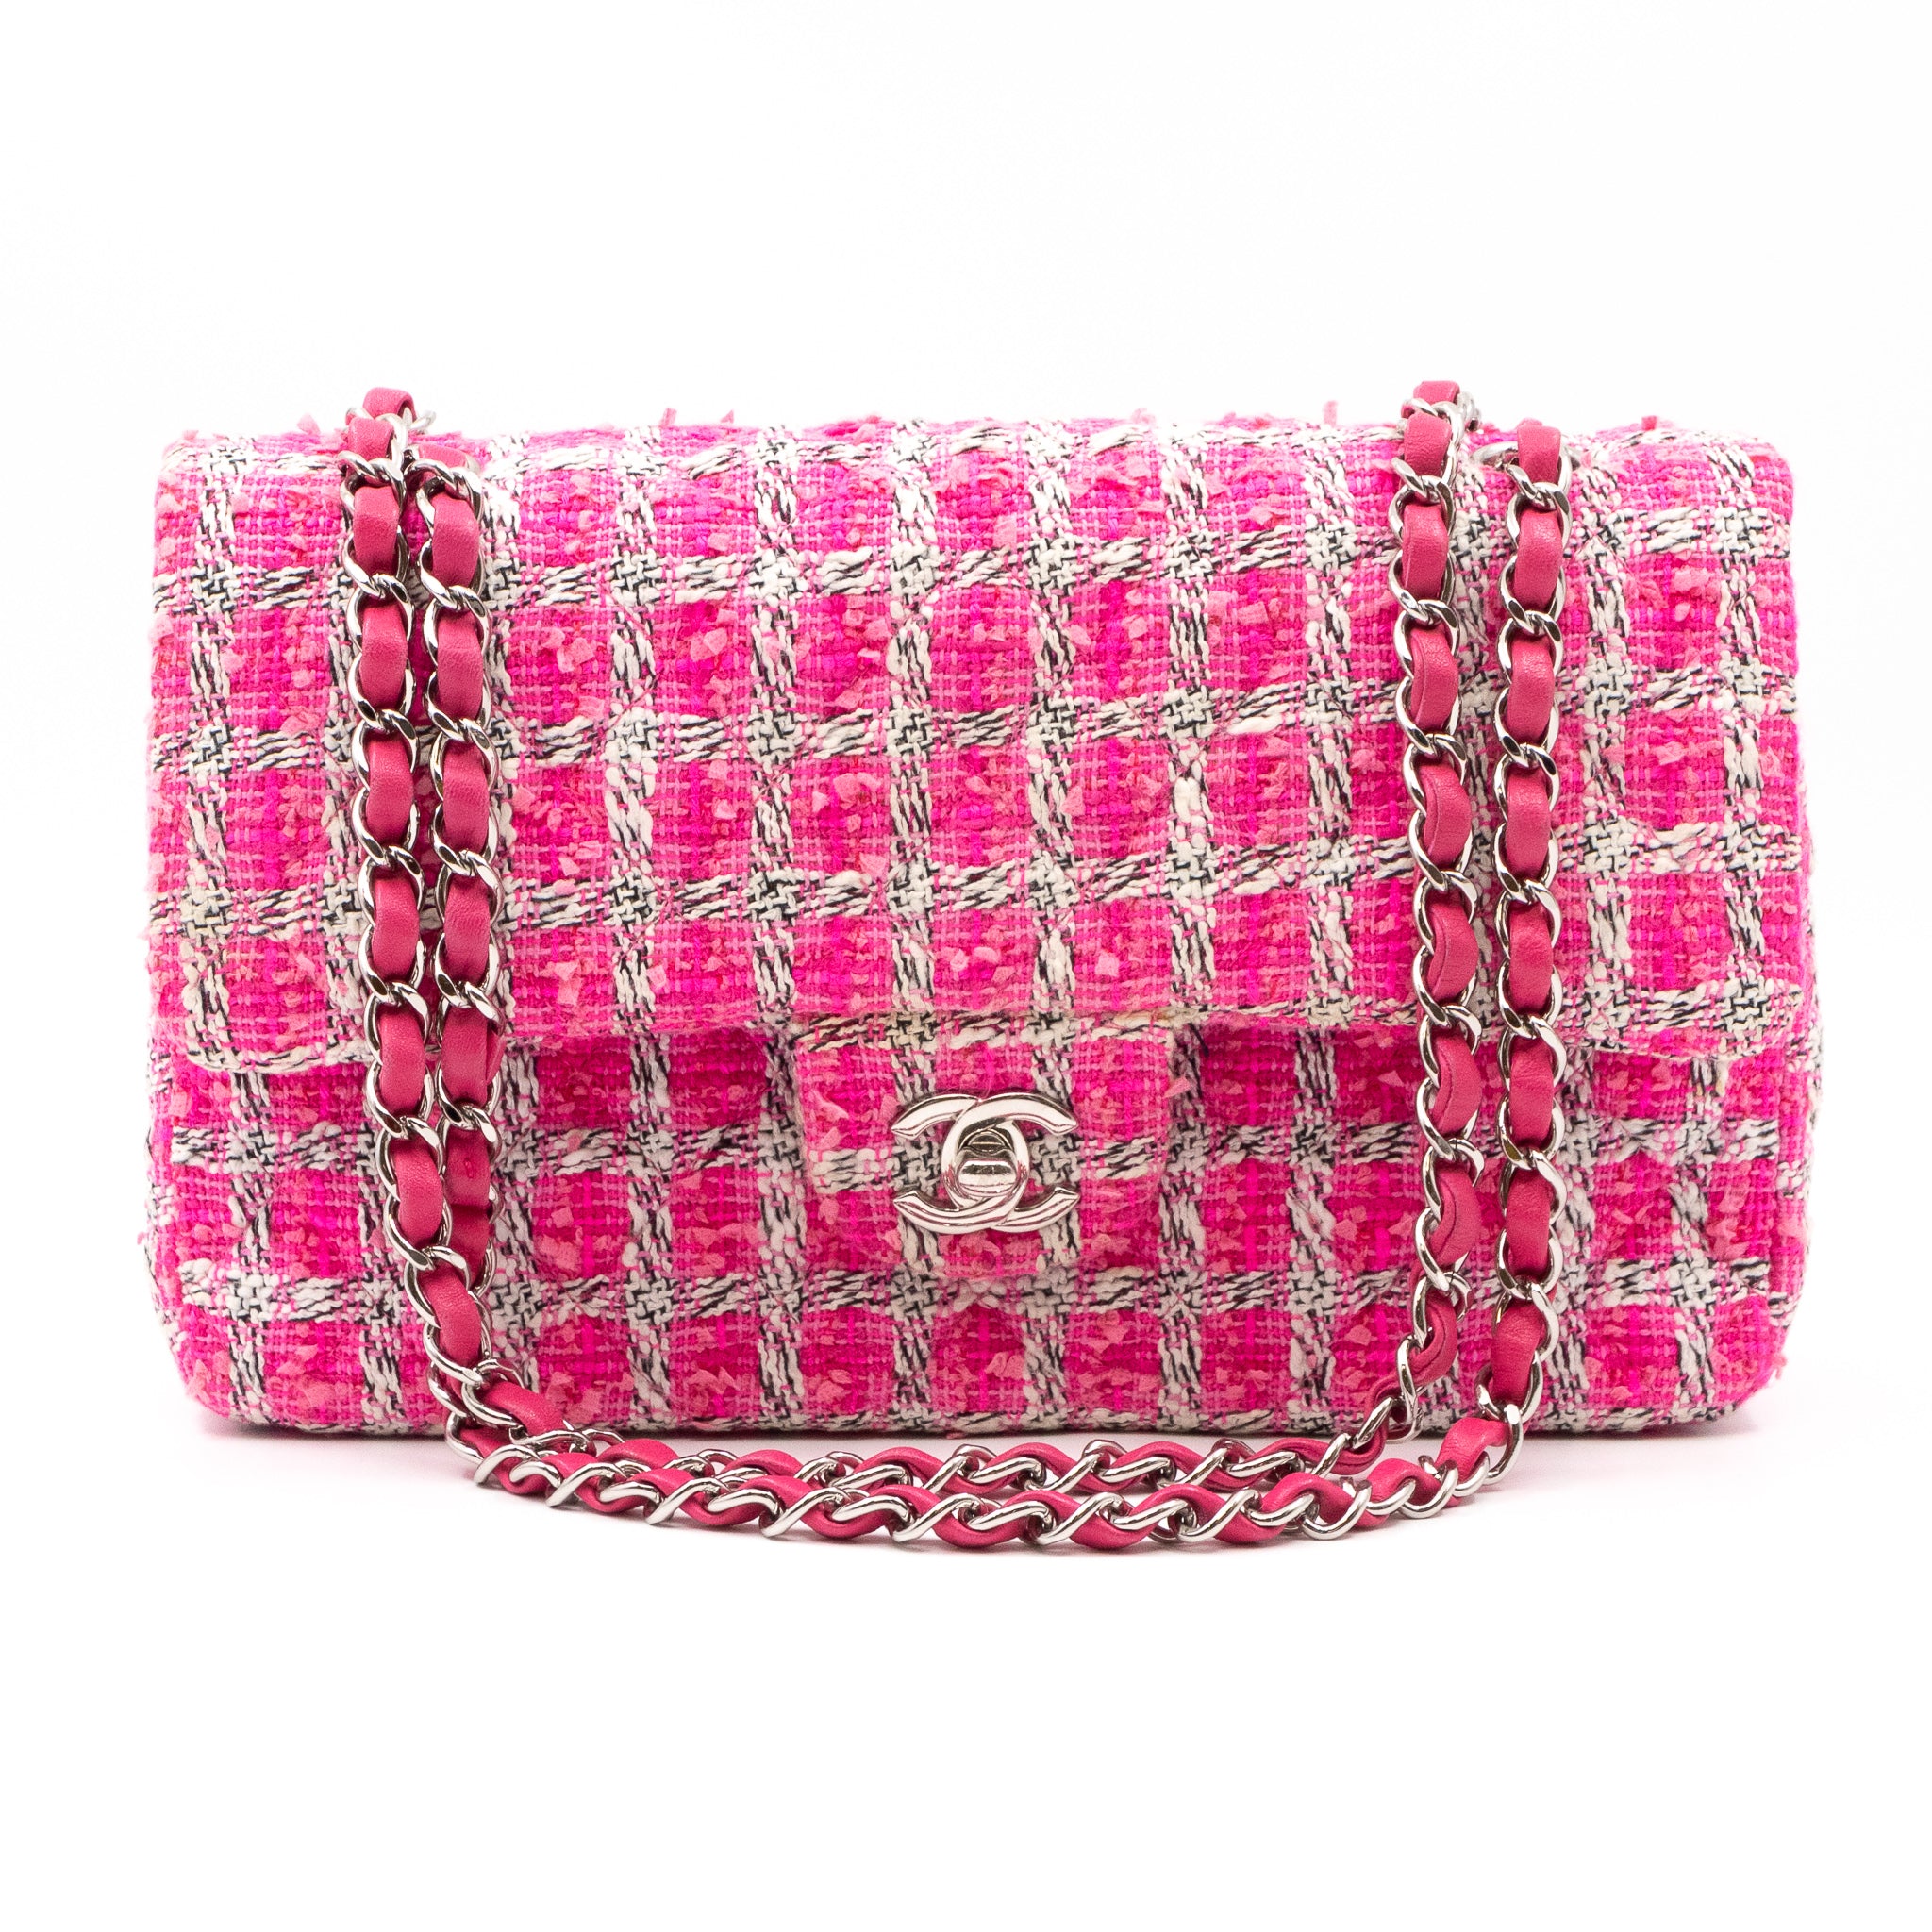 Chanel Classic Double Flap Bag Medium Tweed Pink Silver Hardware